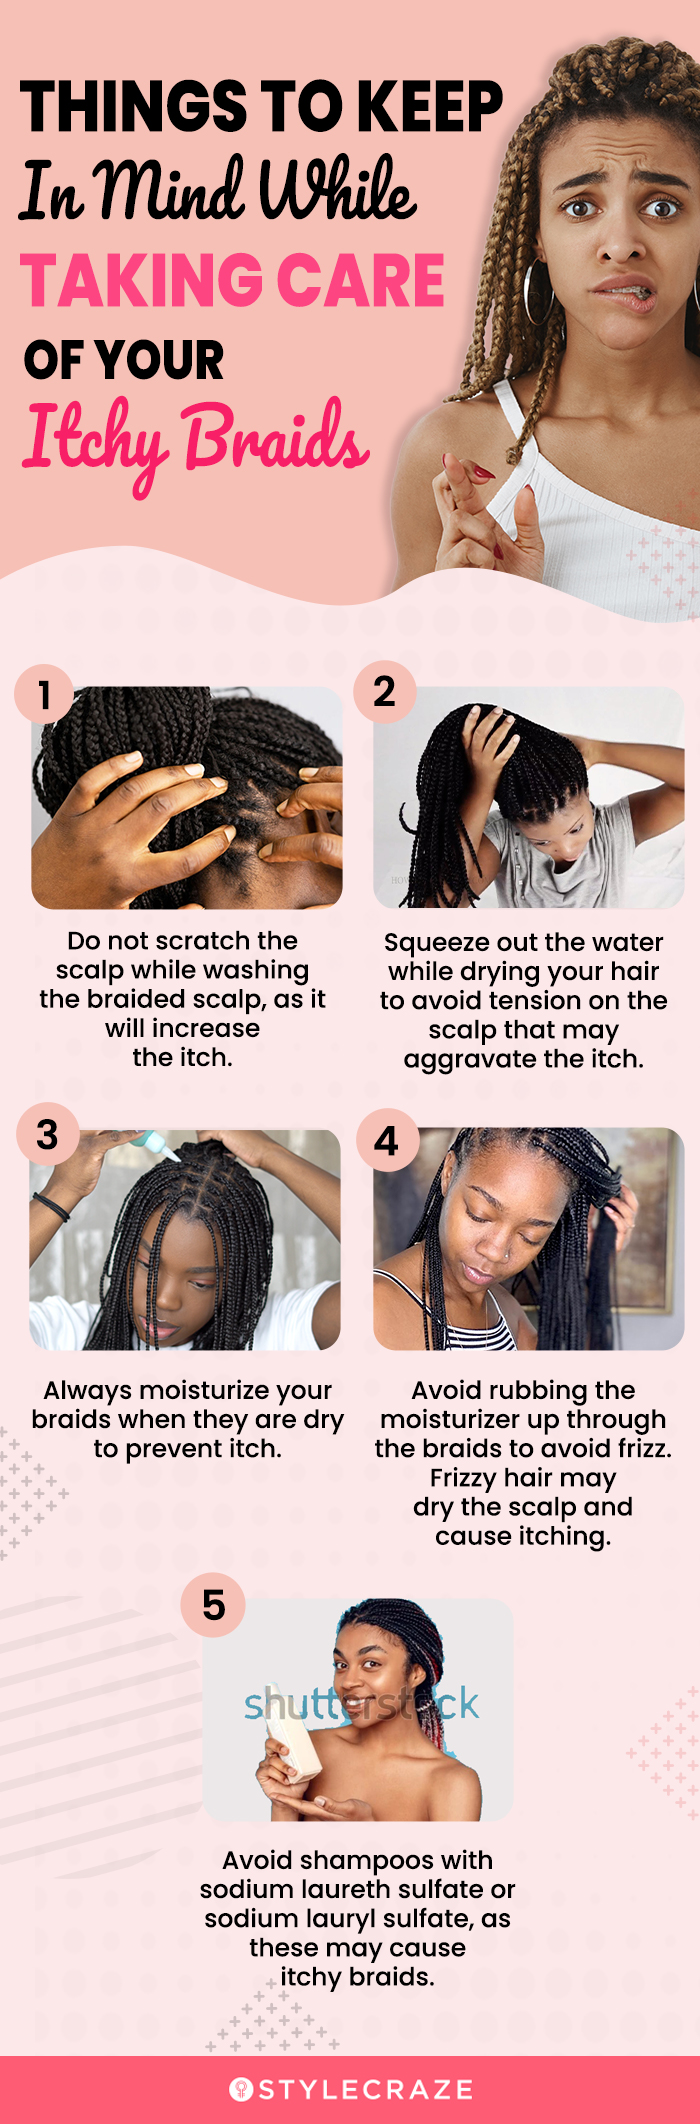 things to keep in mind while taking care of your itchy braids [infographic]